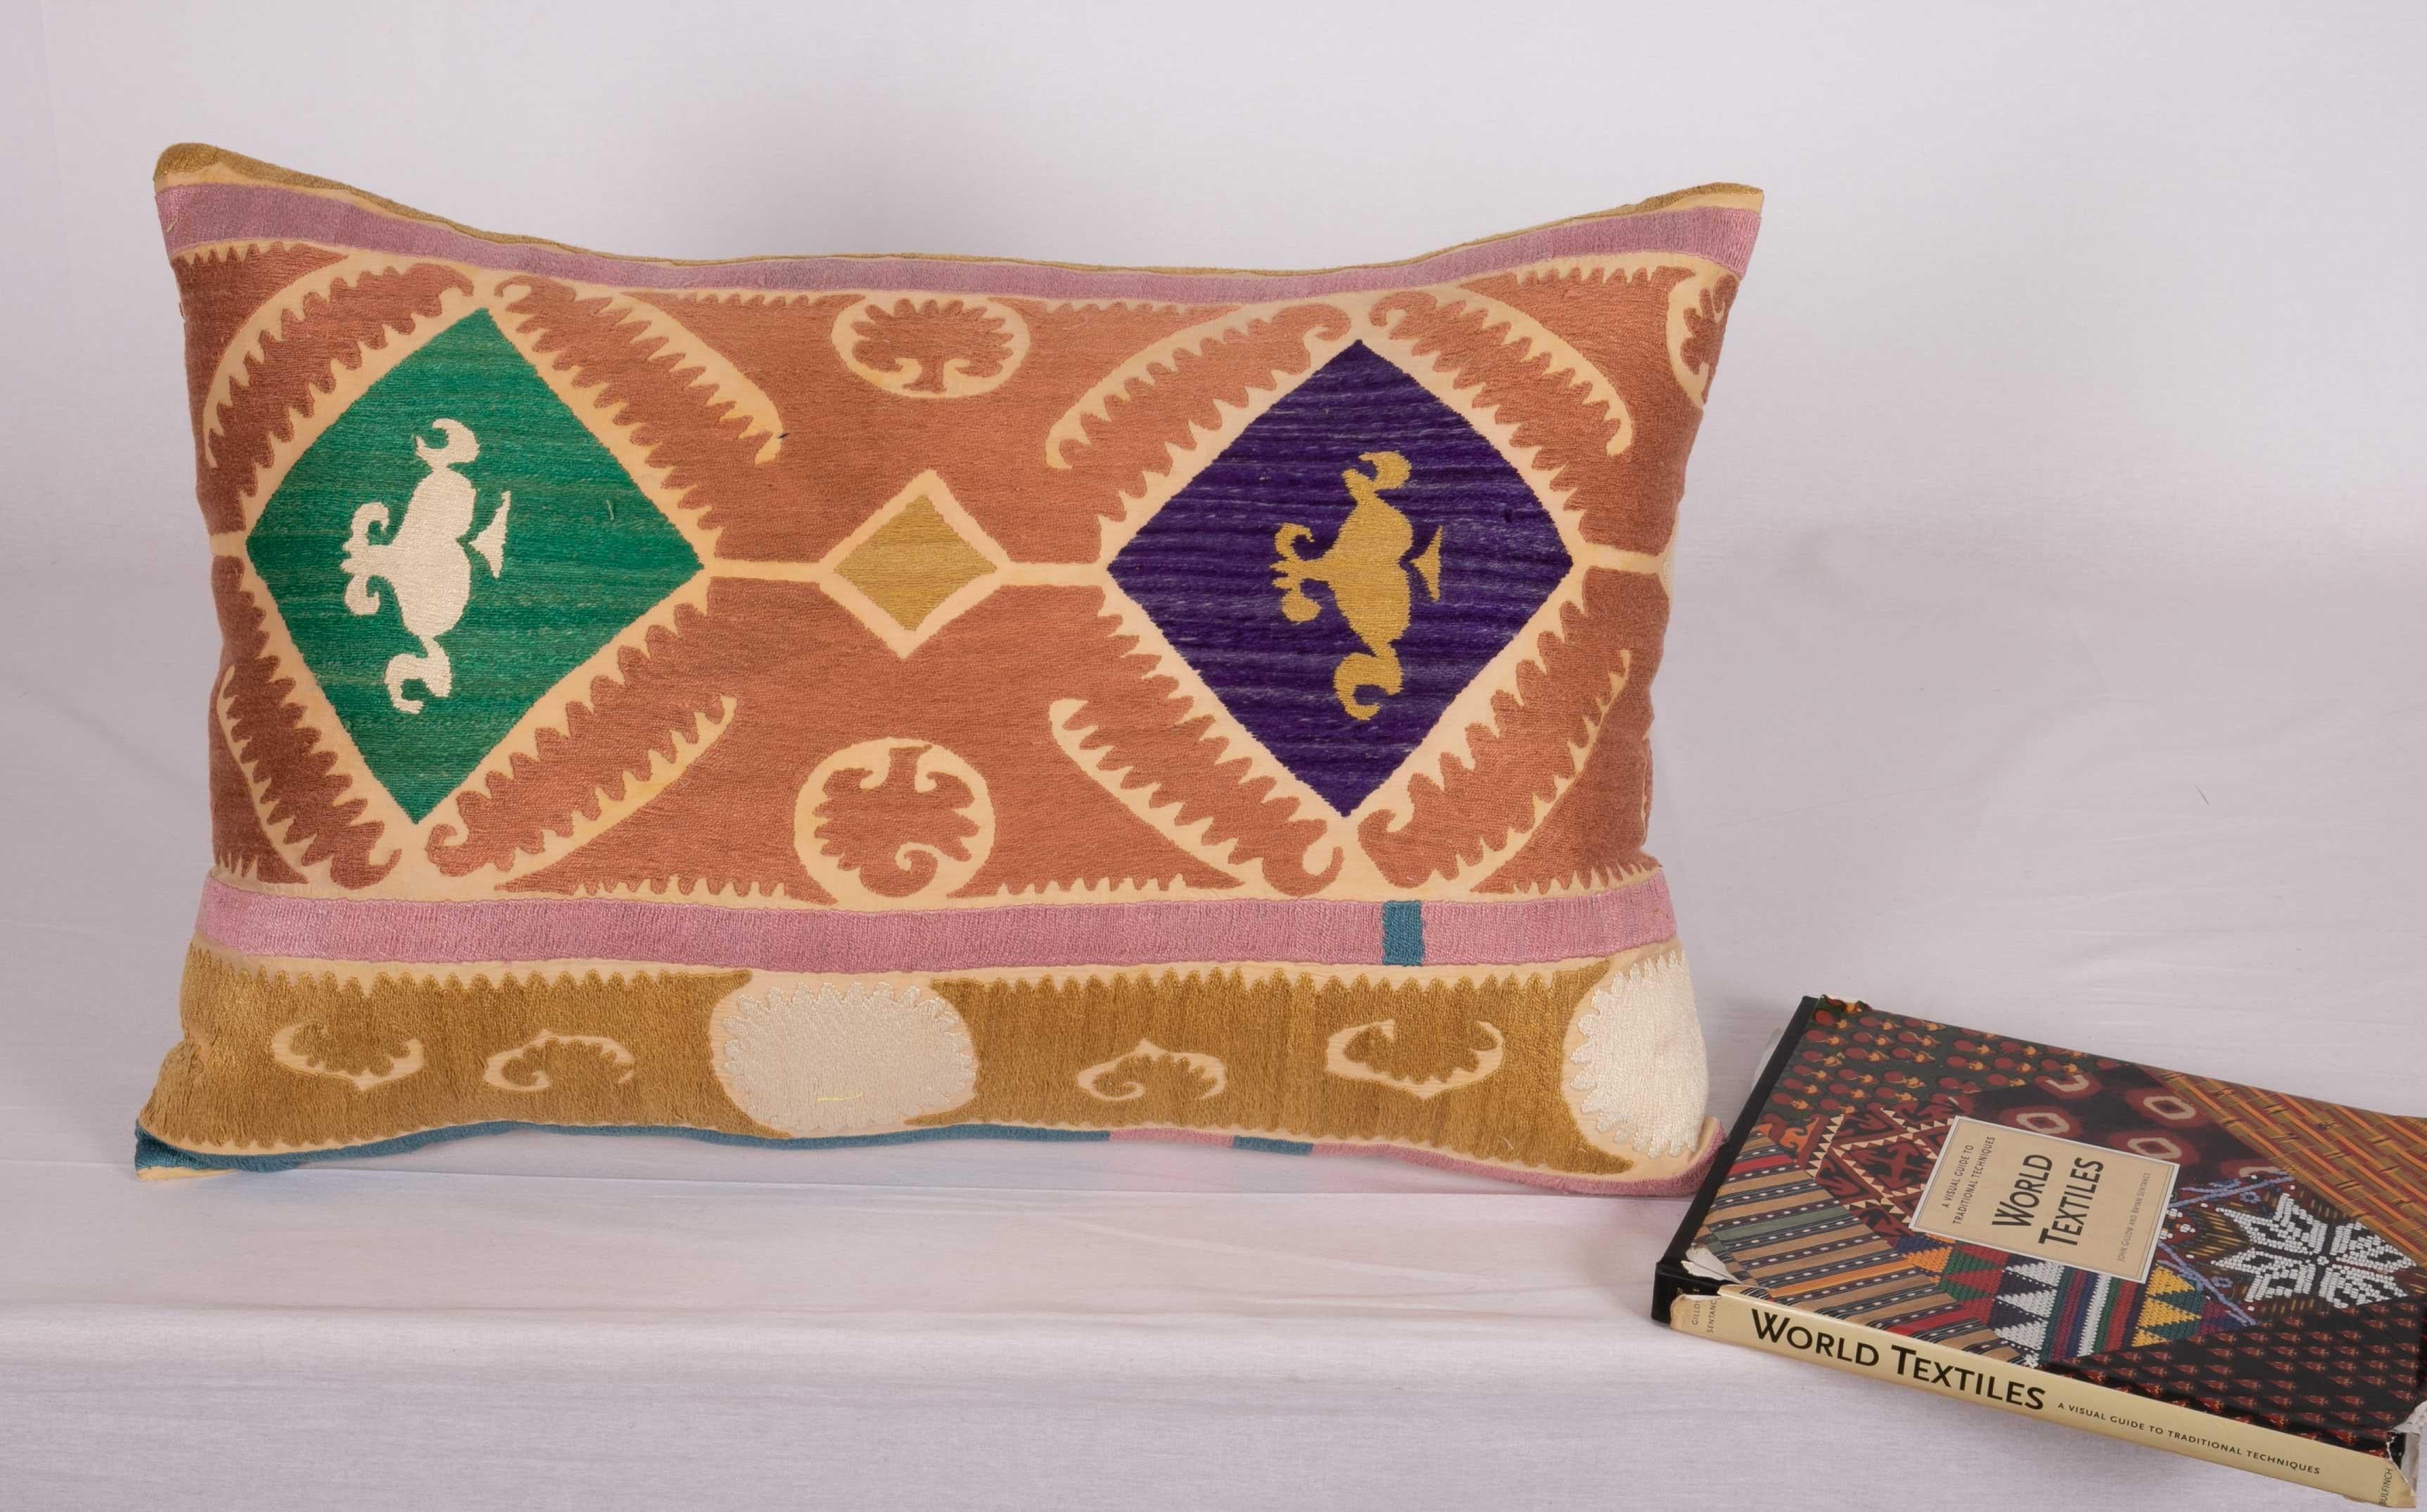 Cotton Suzani Pillow Case Made from a Vintage Uzbek Suzani, Mid-20th Century For Sale